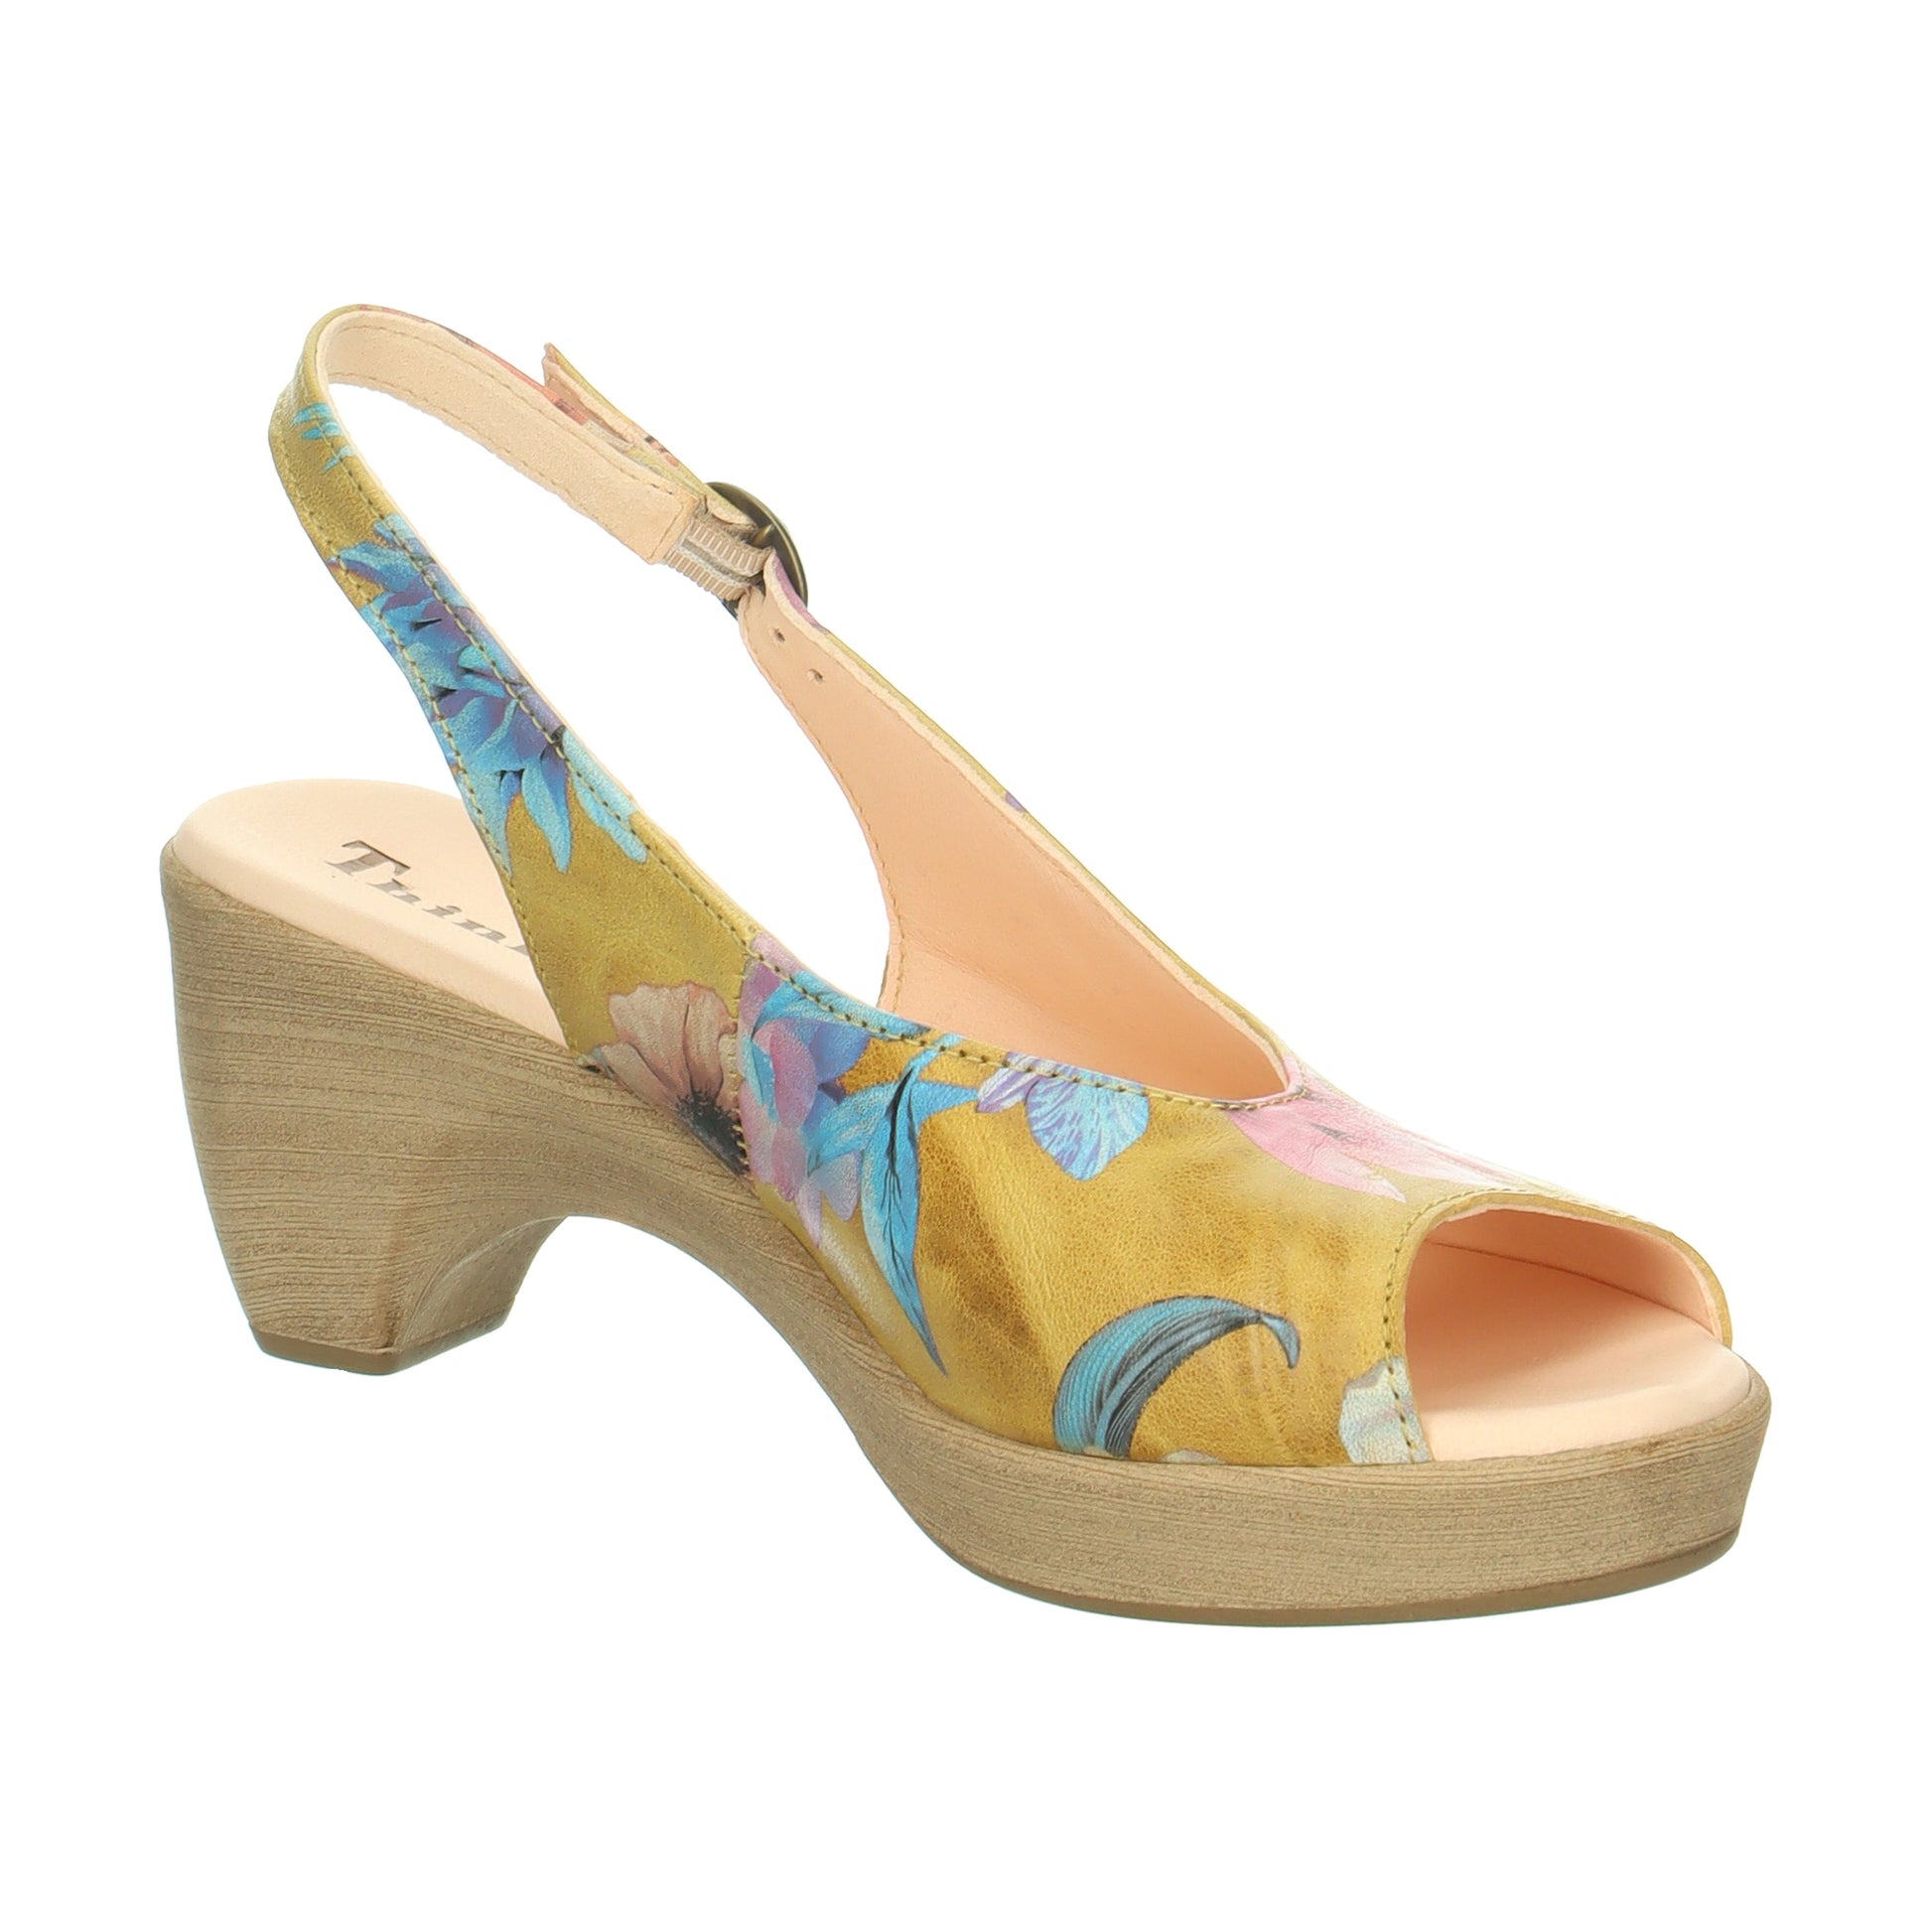 Think Shoes USA Zeppa Sandals - Ananas - 000754-9010AN